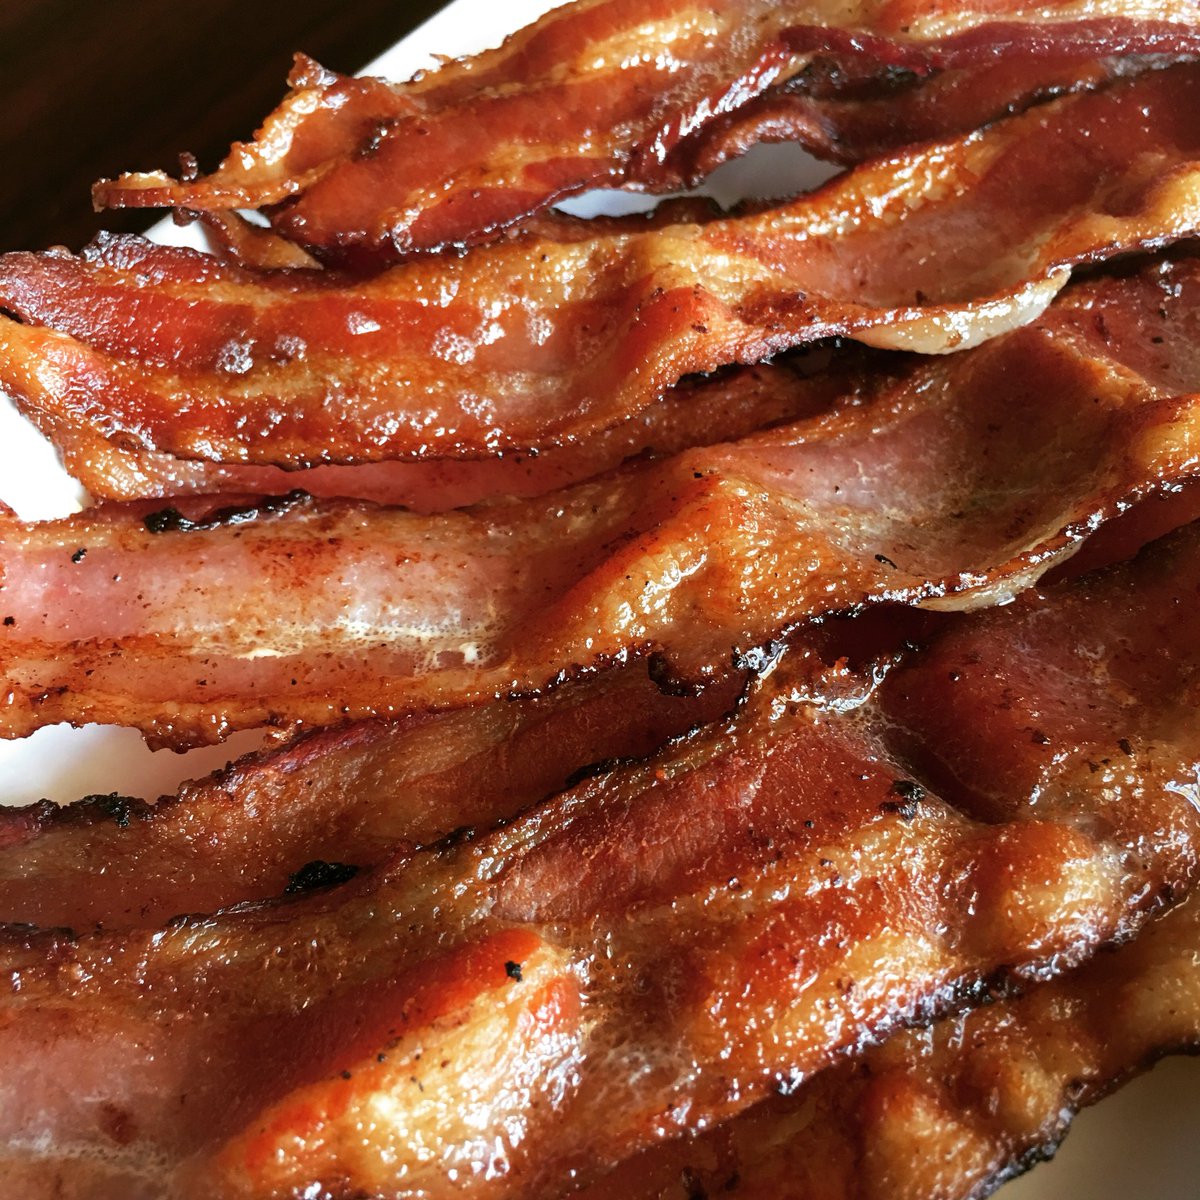 Chicago’s Bacon is now available @SouthLoopMarket and other corner stores around #Chicago! 🥓🥓

#PeerBacon #bacon #southloopmarket #MondayMorning